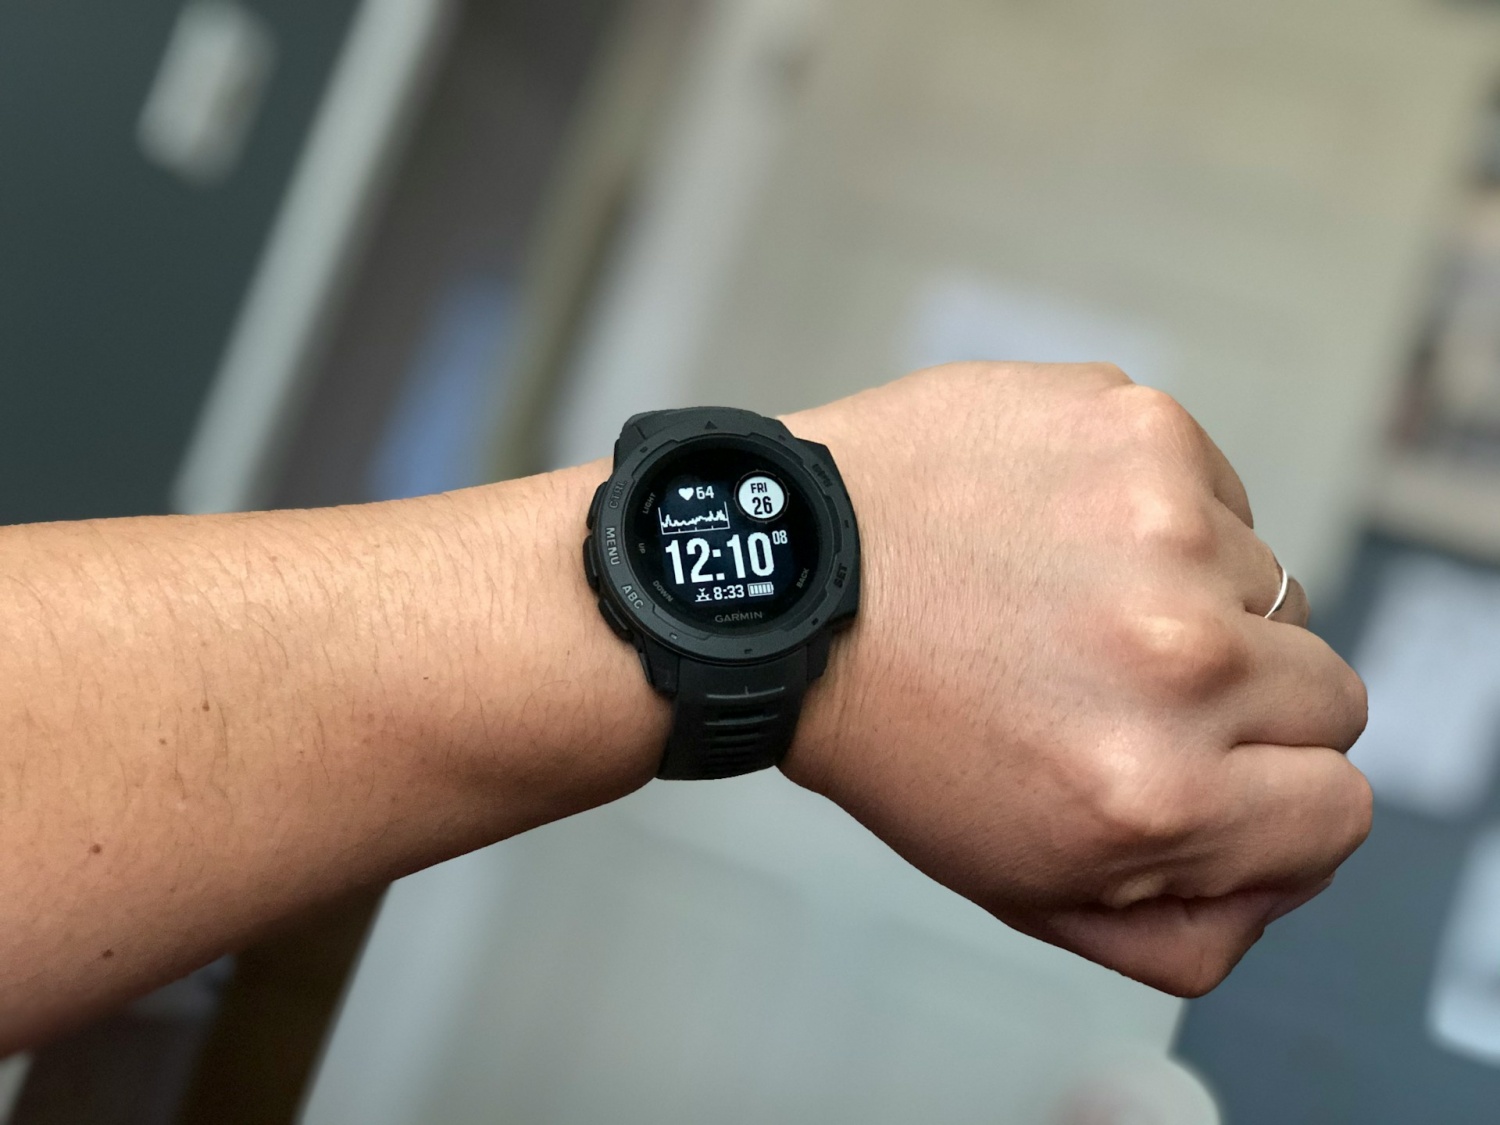 Garmin Smartwatch Owners Discover Interesting Improvement in Recovery Heart Rate Feature